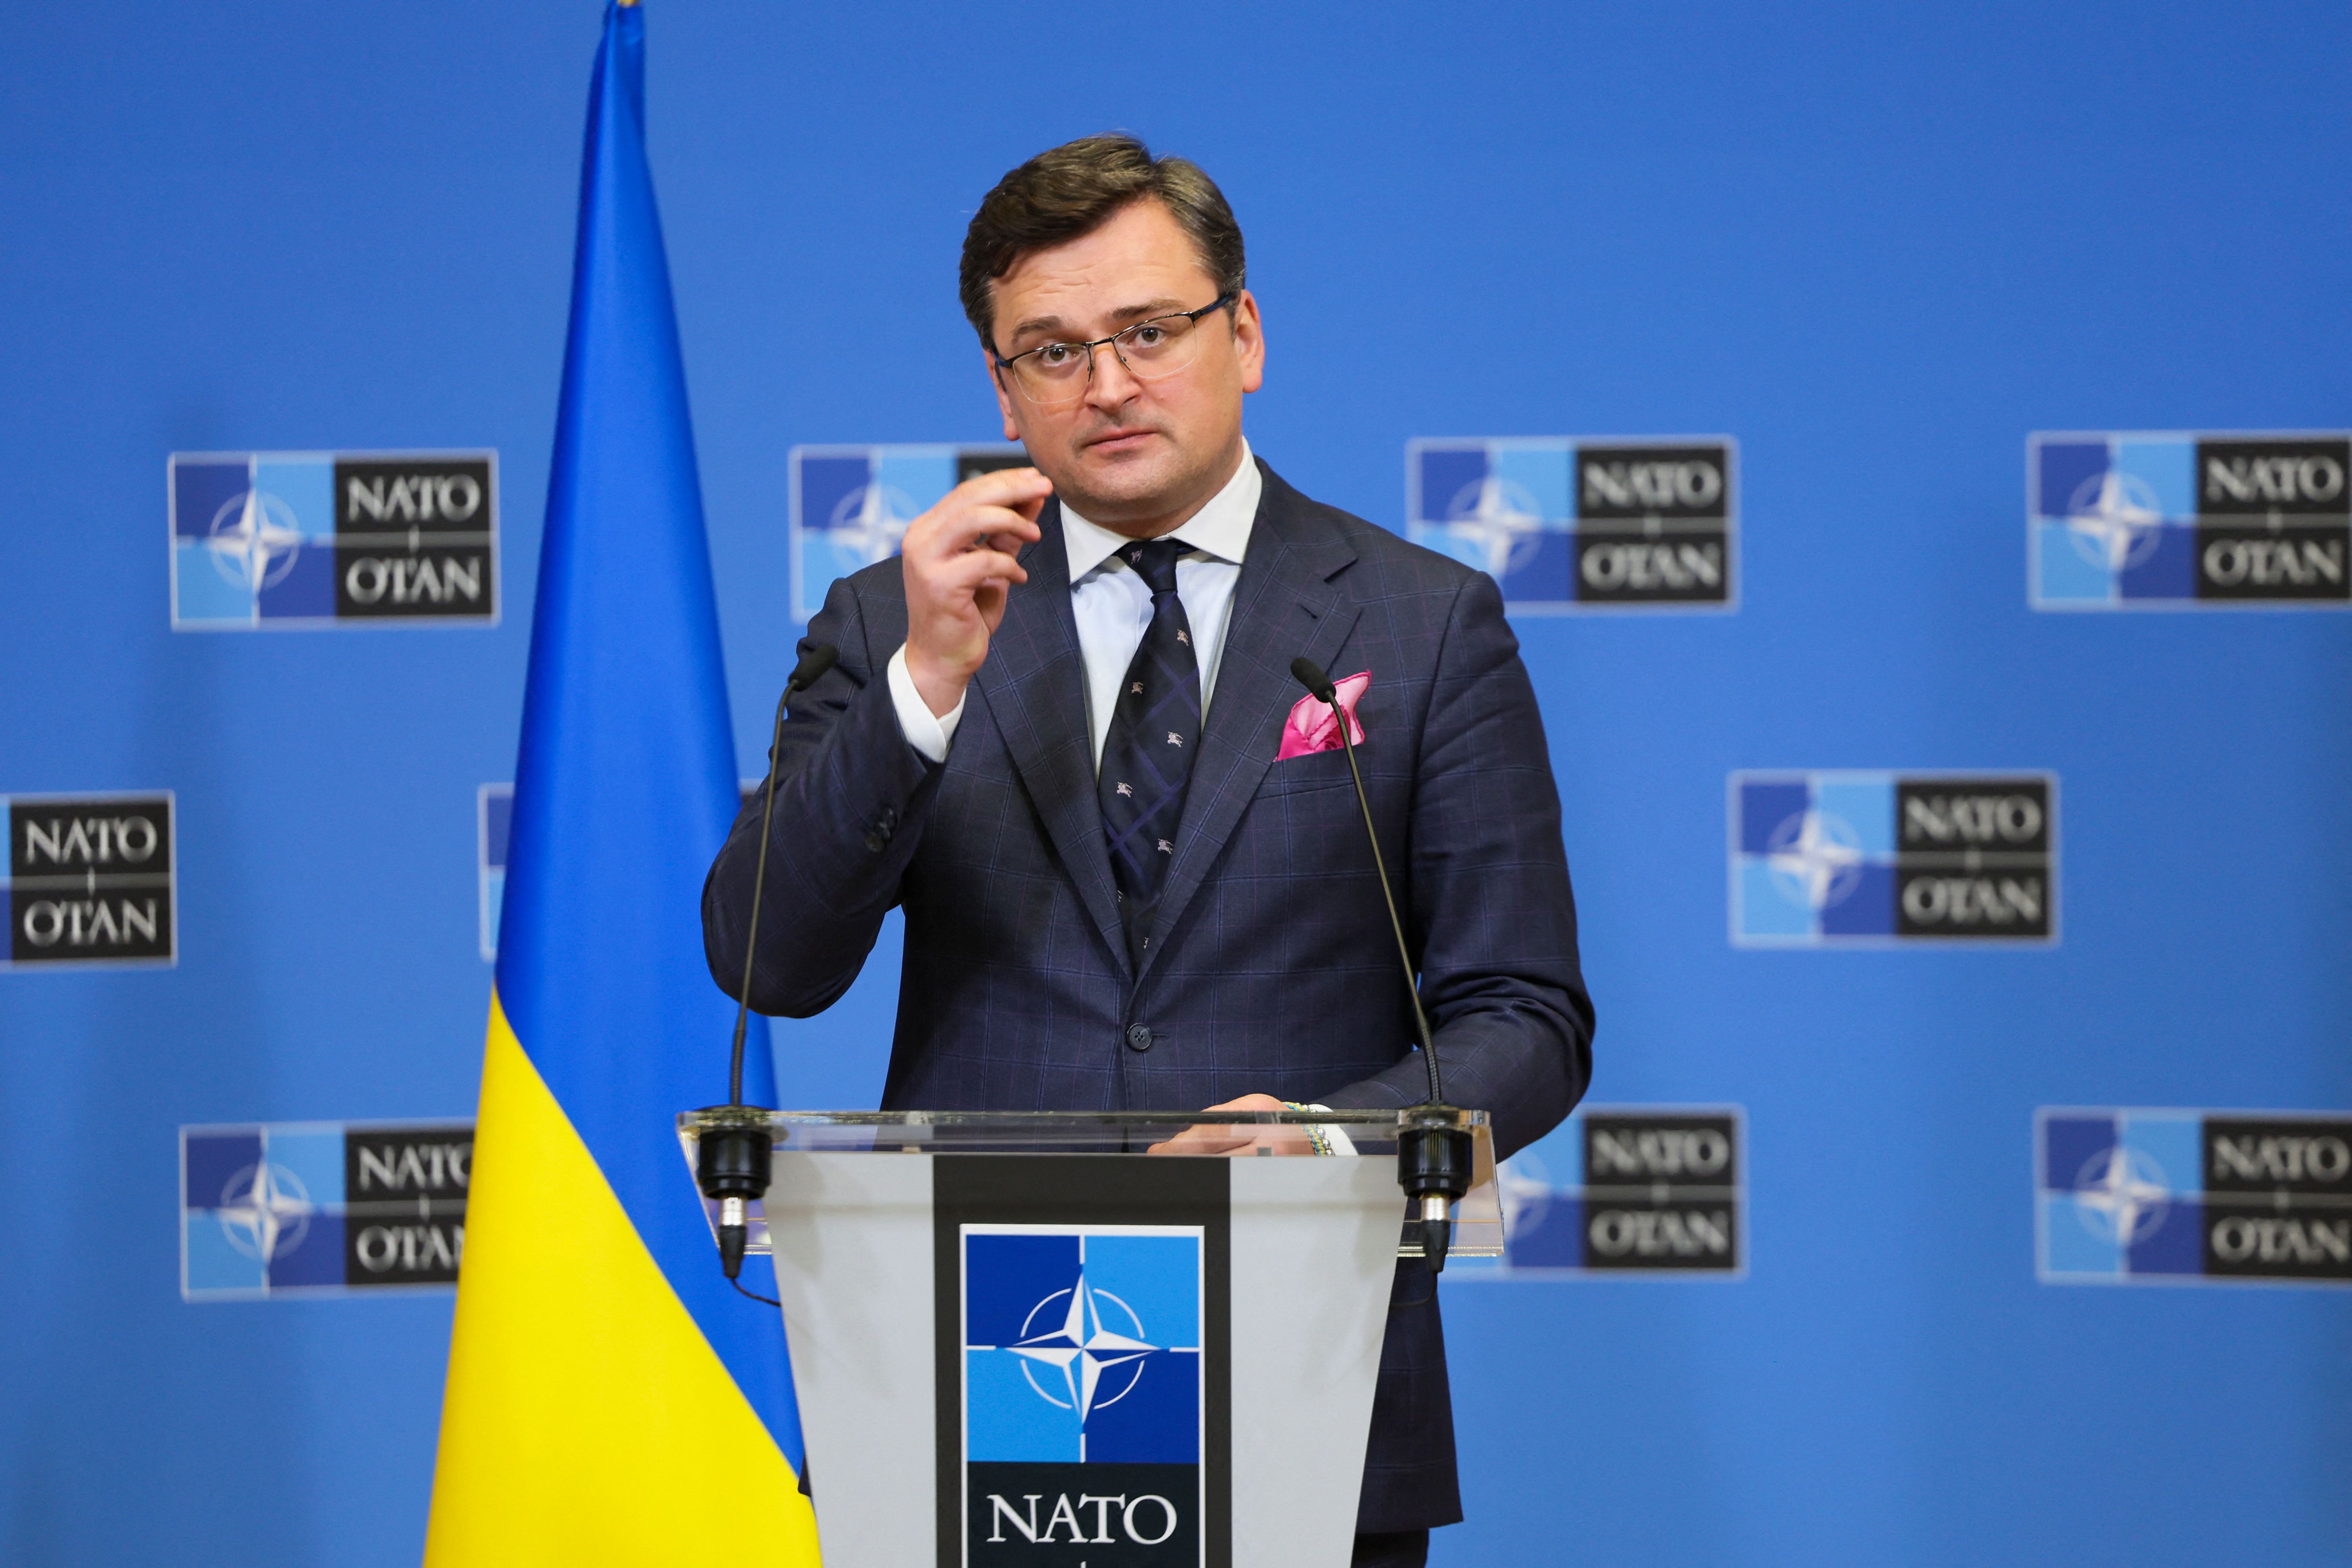 Ukrainian Foreign Minister Dmytro Kuleba speaks during a news conference at NATO headquarters in Brussels, Belgium, on April 7.